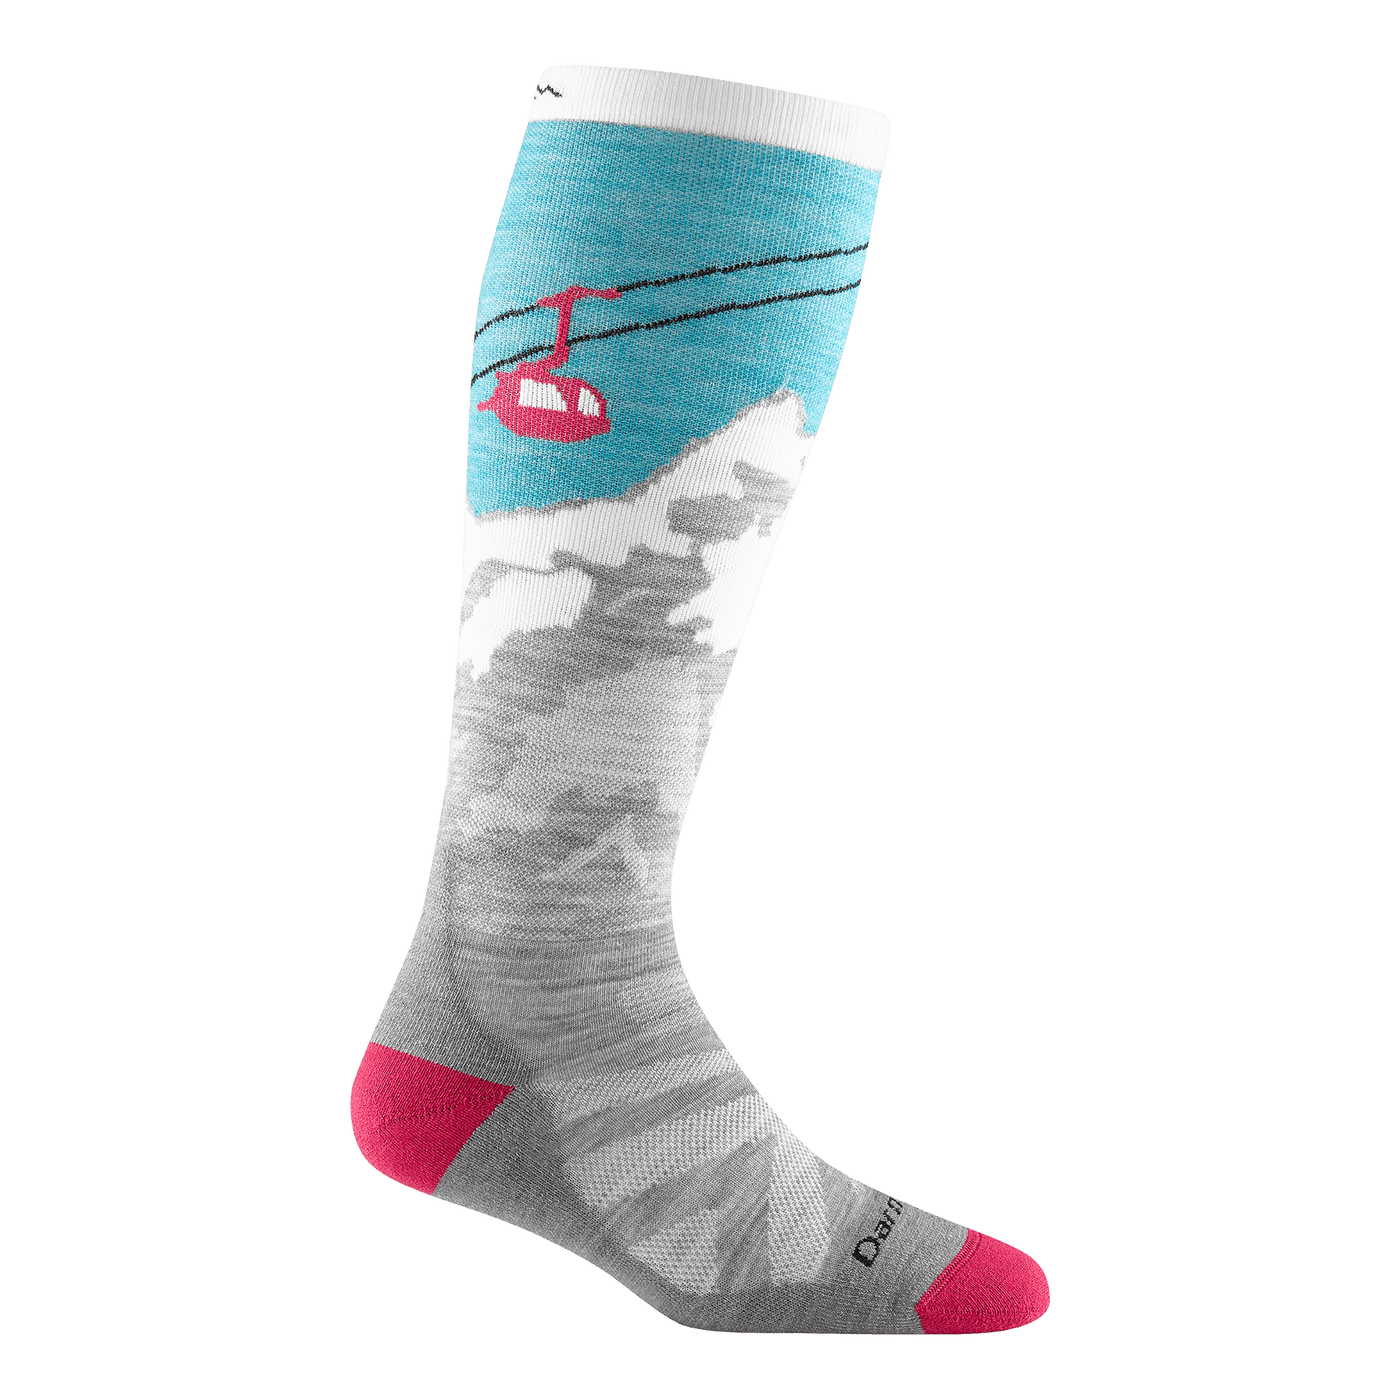 Yeti | Midweight Women's Over the Calf #1827 - Darn Tough - The Sock Monster